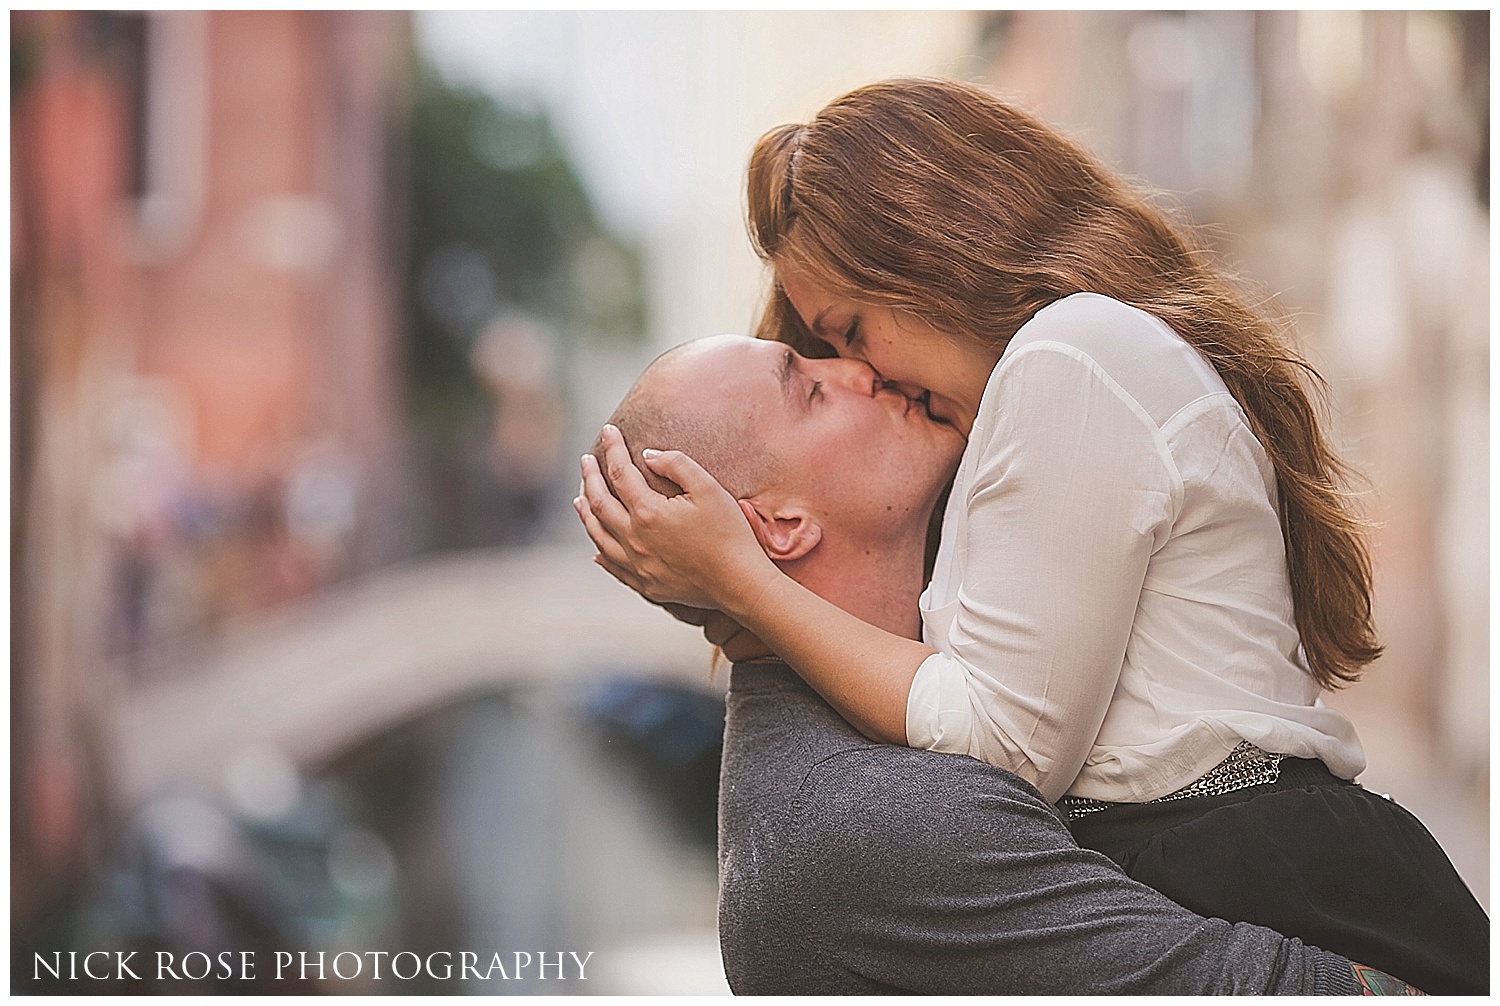 Engagement photography in Venice